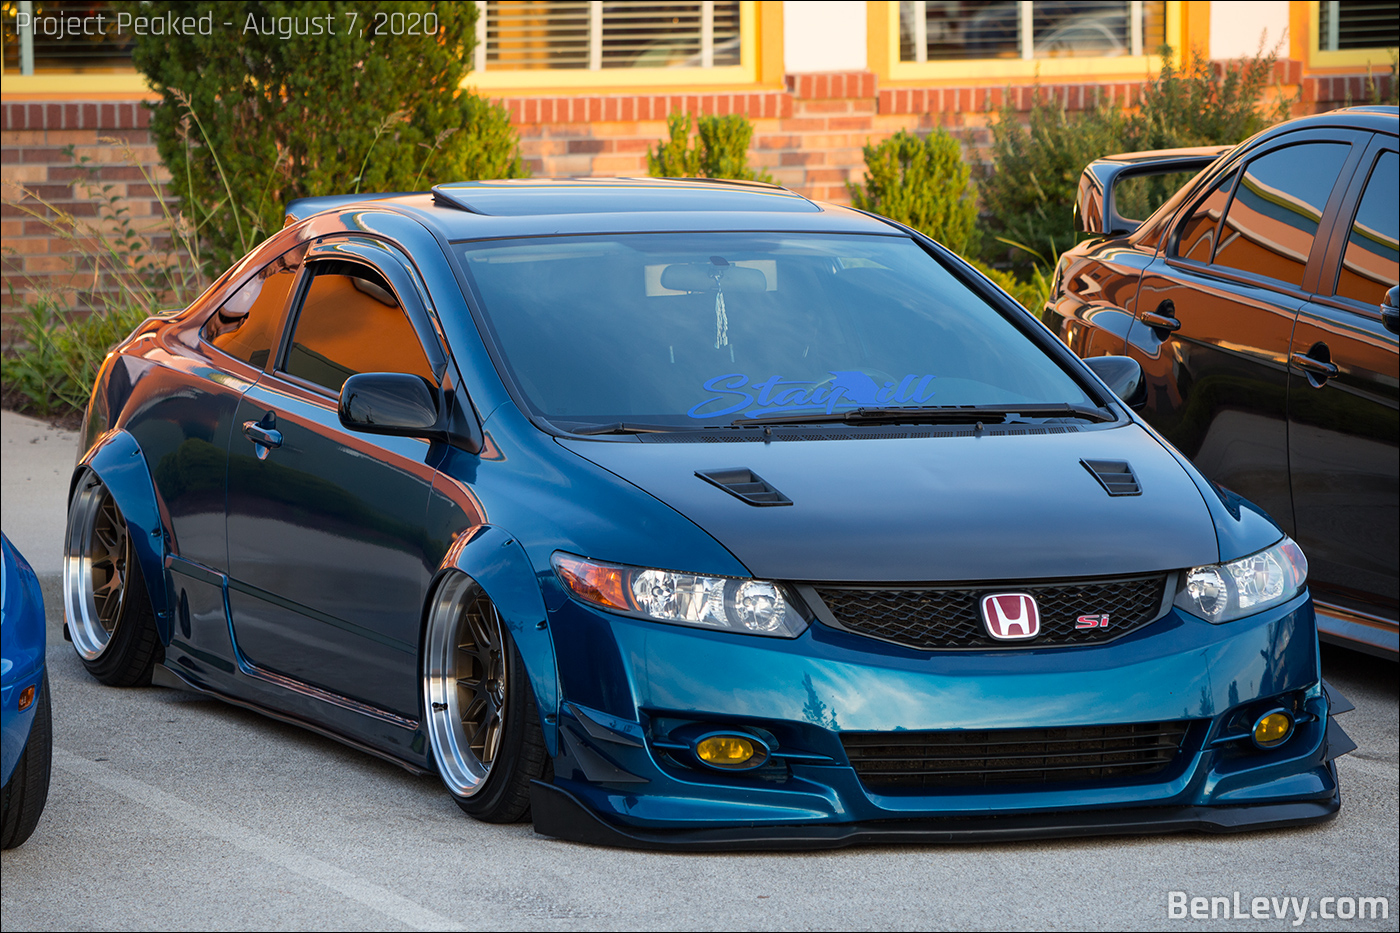 Honda Civic coupe with fender extensions